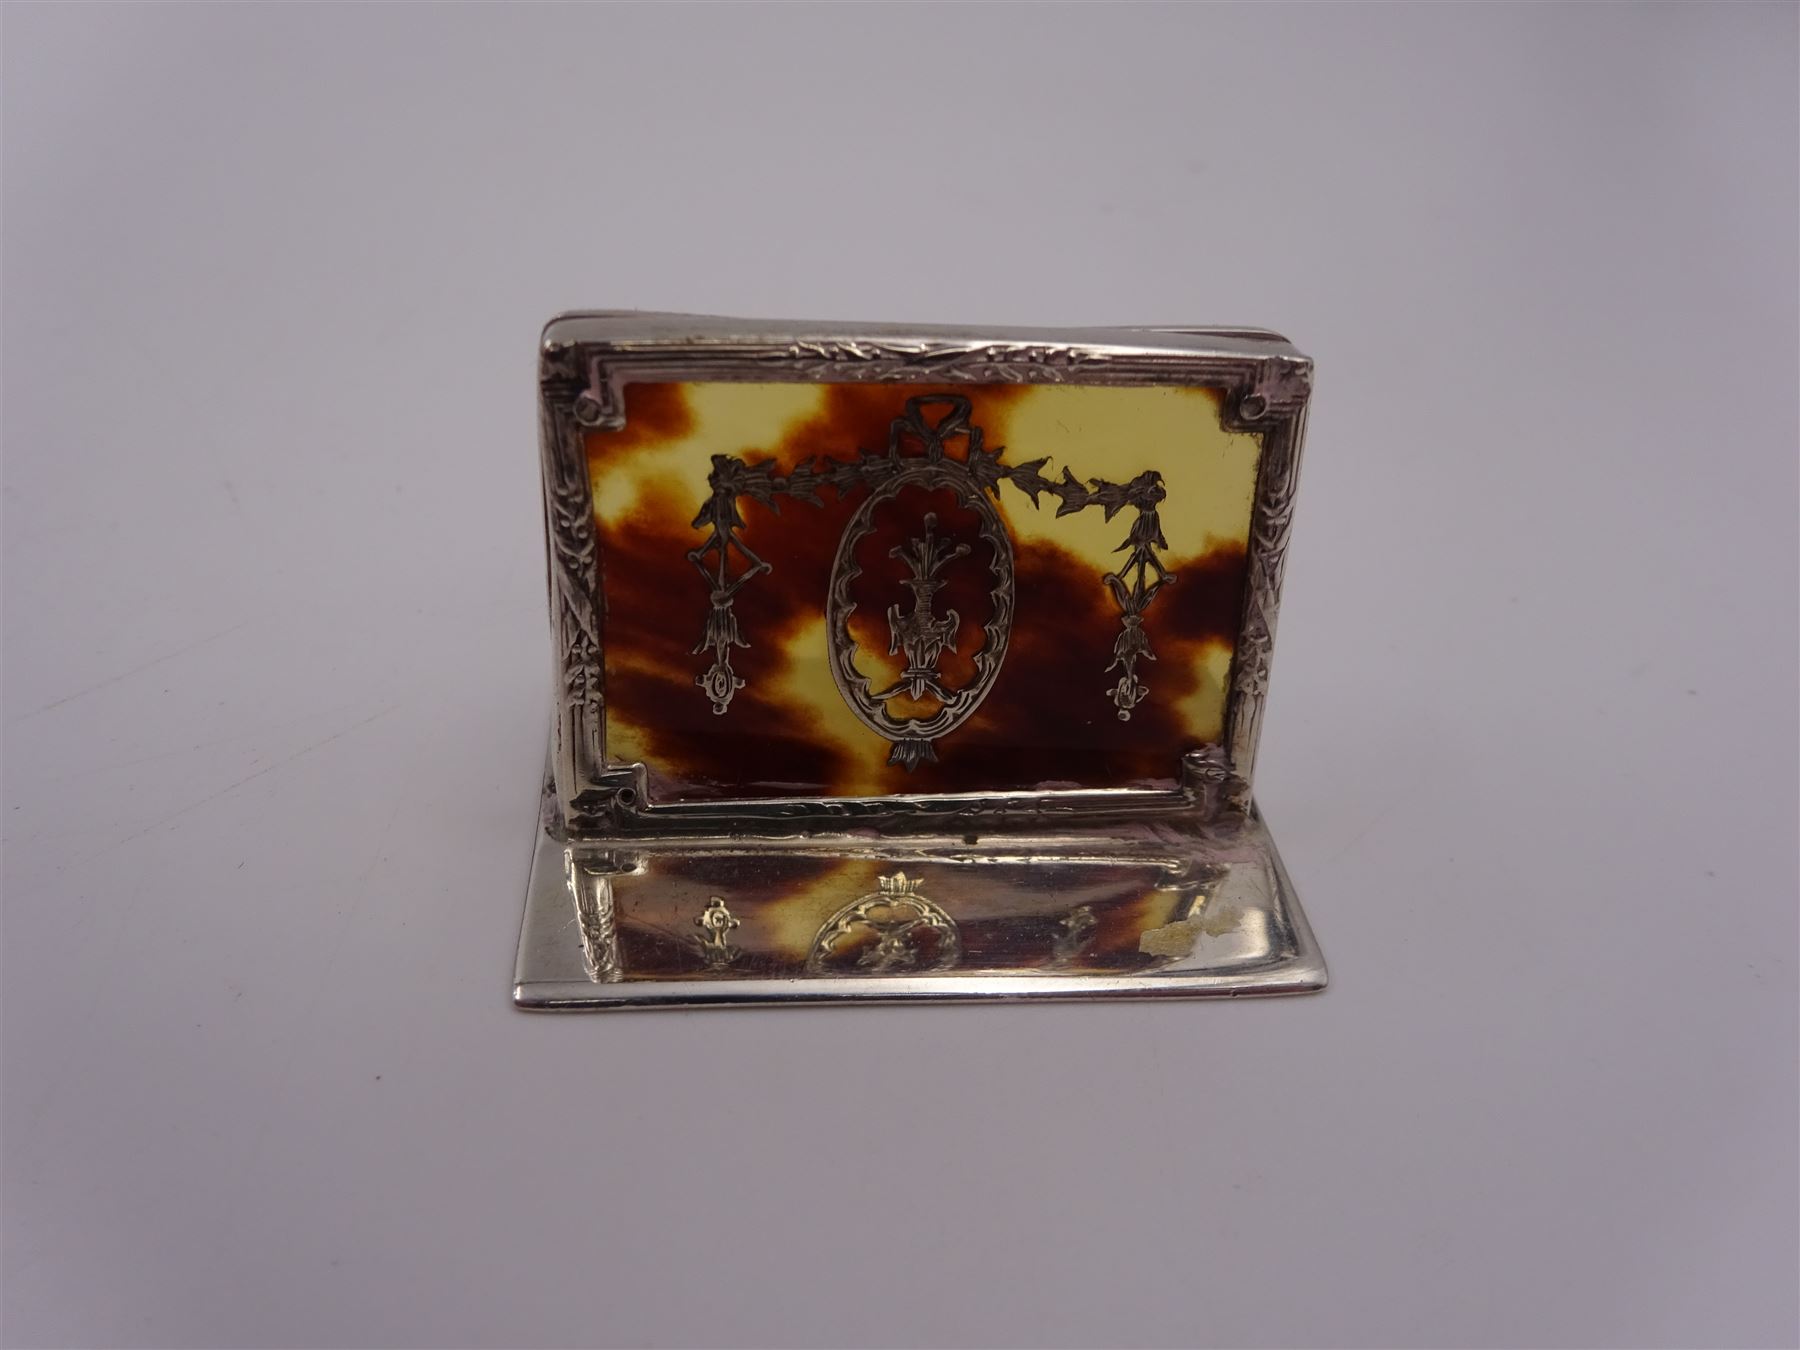 Set of six early 20th century silver mounted tortoiseshell place card holders by Asprey - Image 24 of 28